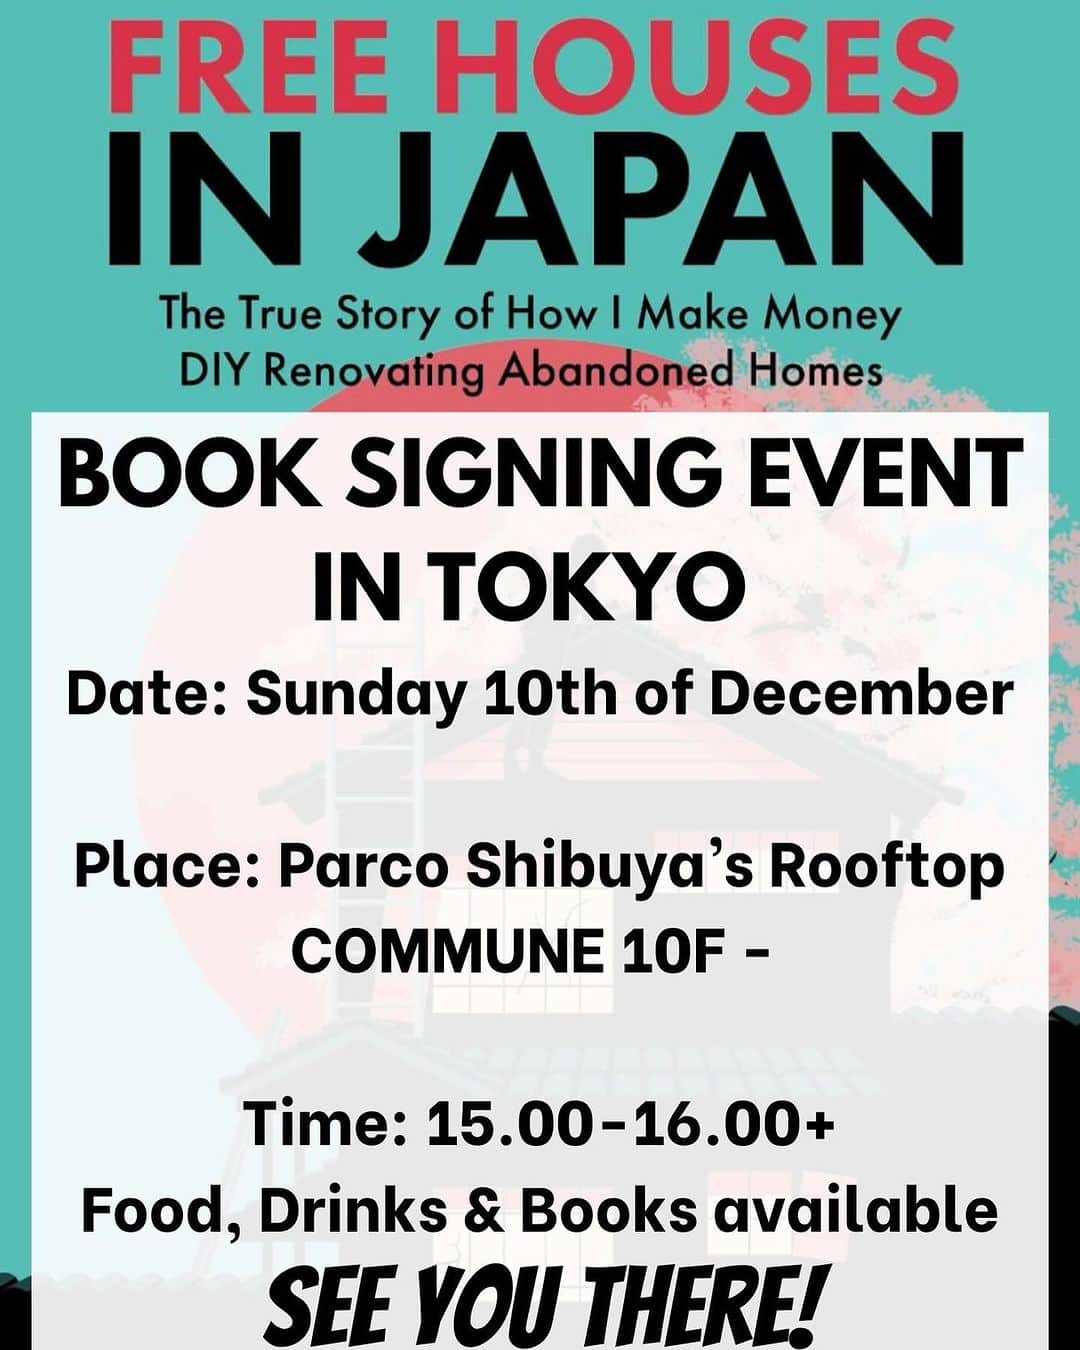 Anton Wormannのインスタグラム：「📚 Meet-up & Book-Signing Event in Tokyo! 🌞  Join me on December 10th in Shibuya for my Book Signing event for ”FREE HOUSES IN JAPAN”  📍 Location: PARCO, COMMUNE 10F, Shibuya, Tokyo ⏰ Time: 15-16pm 👥 Bring good energy & your copy of Free Houses in Japan.  See you the 10th! Will be fun! ☀️ #FreeHousesinJapan #Antoninjapan #Akiya #Tokyo #Japan」